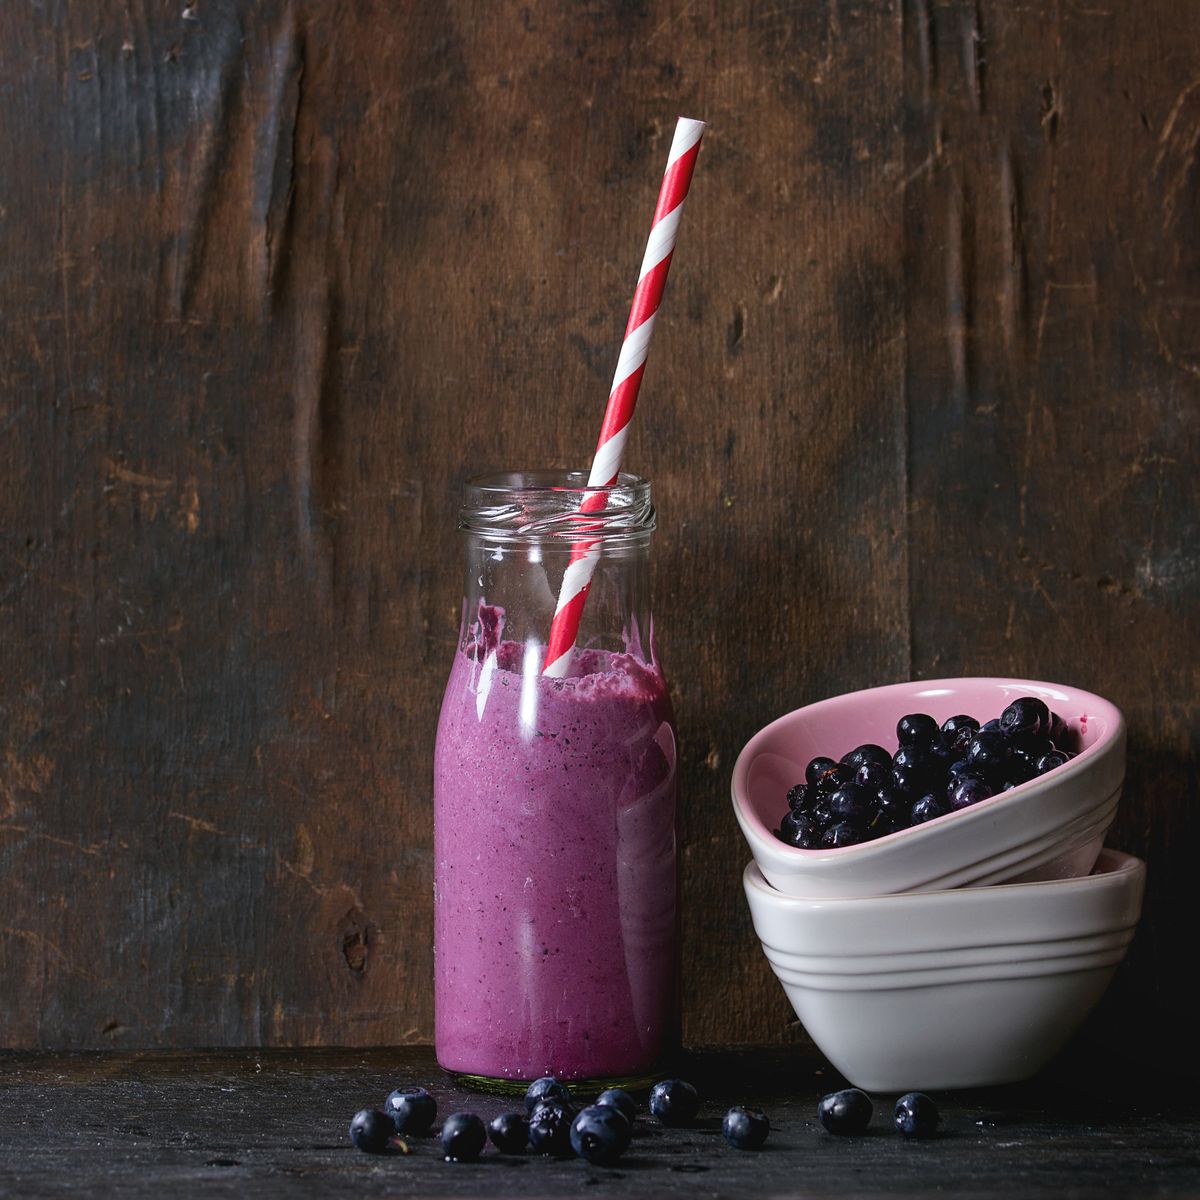 <p>The secret behind this delicious smoothie? Both frozen <em>and</em> fresh blueberries. Two cups of berries (and one cup of spinach) are in this simple recipe that can be whipped up in under 10 minutes. Feel free to add a tablespoon of nut butter for a protein boost. </p><p>Get the recipe for Blueberry Smoothie from <a href="https://www.delish.com/cooking/recipe-ideas/a39576599/blueberry-smoothie-recipe/">Delish</a>.</p>